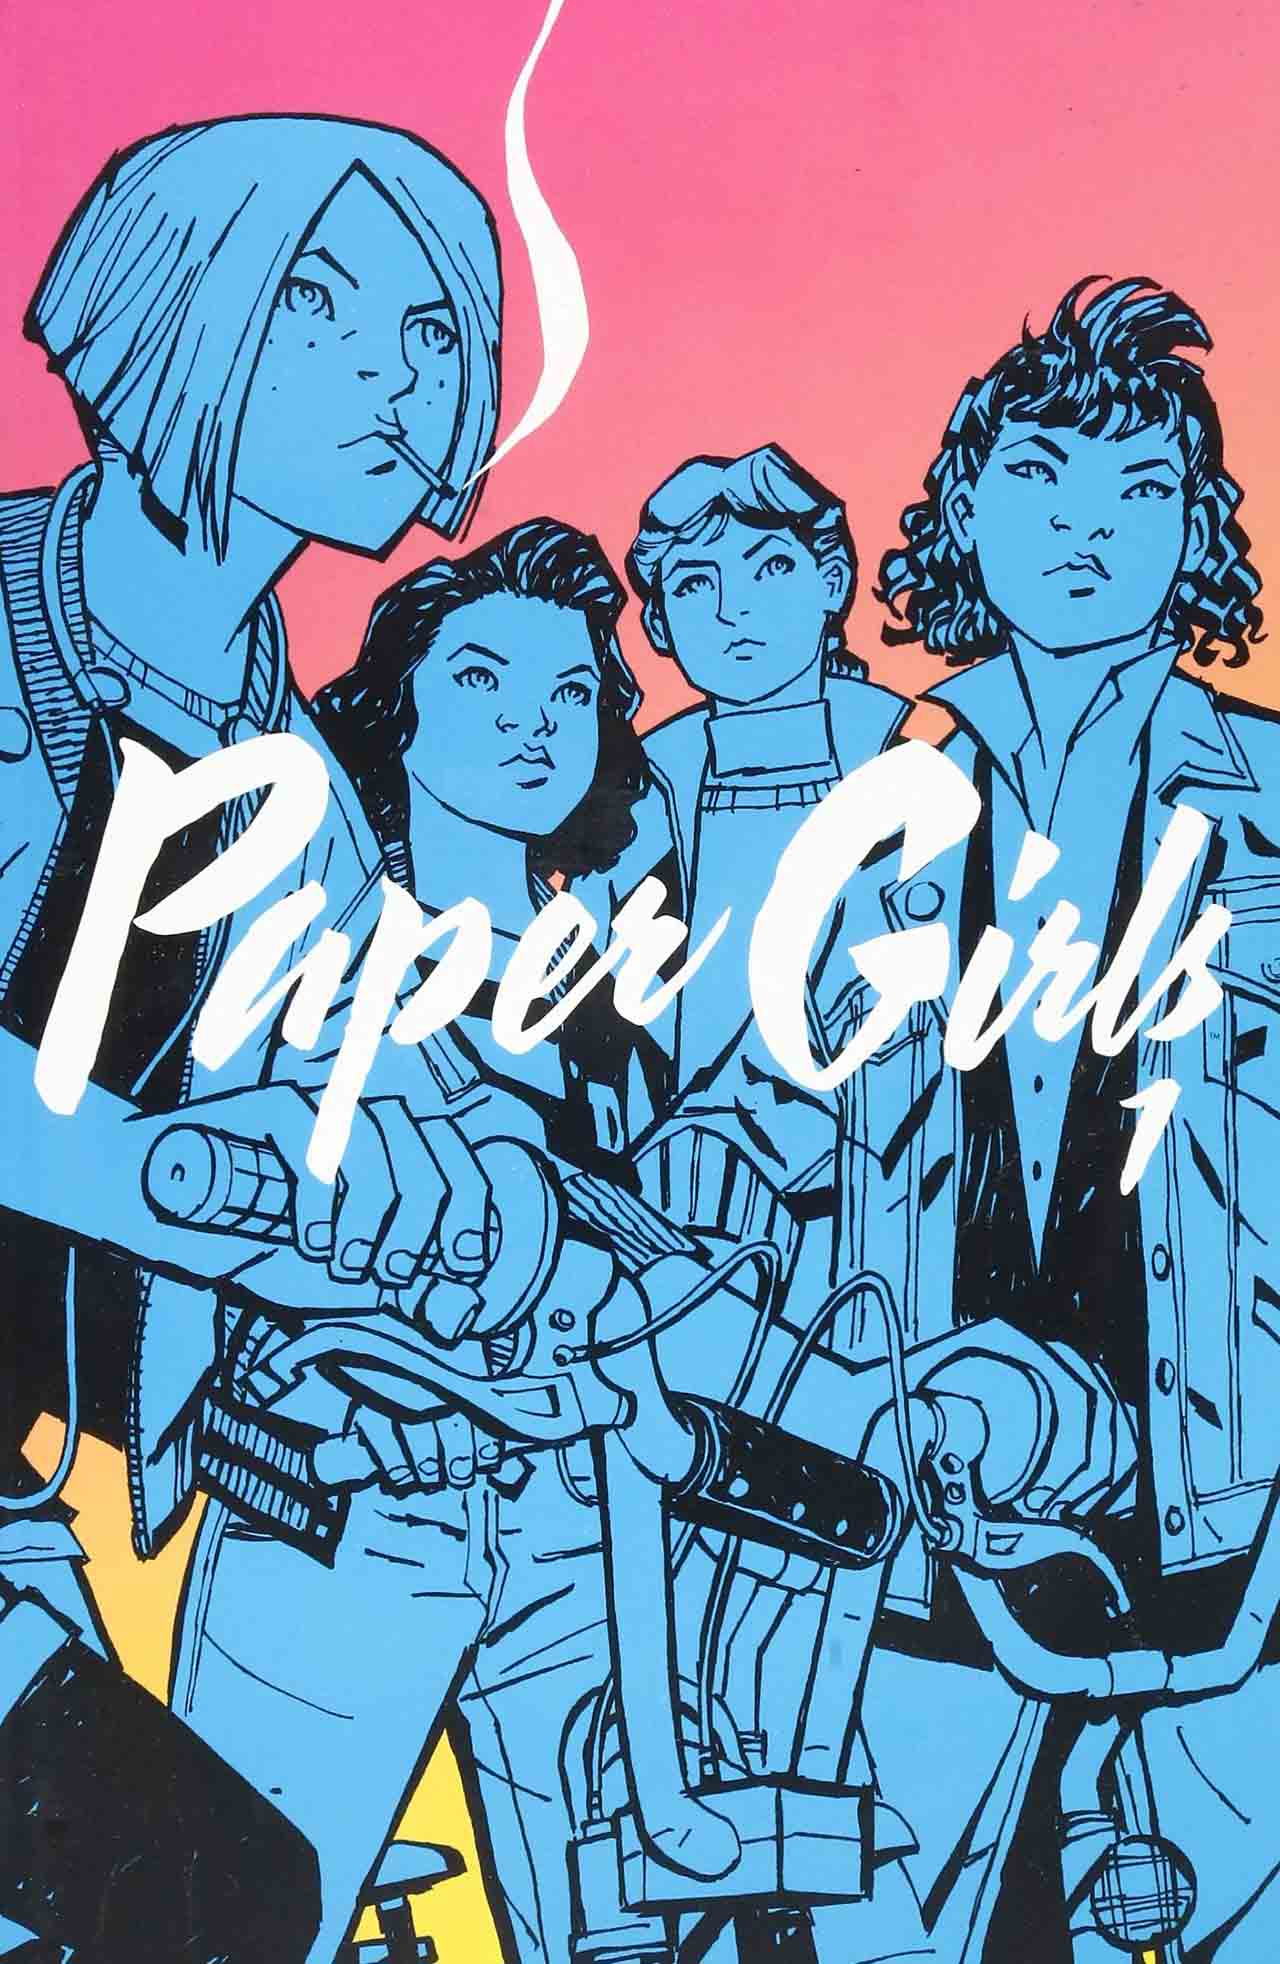 Comics With Powerful Female Leads To Read On International Women's Day